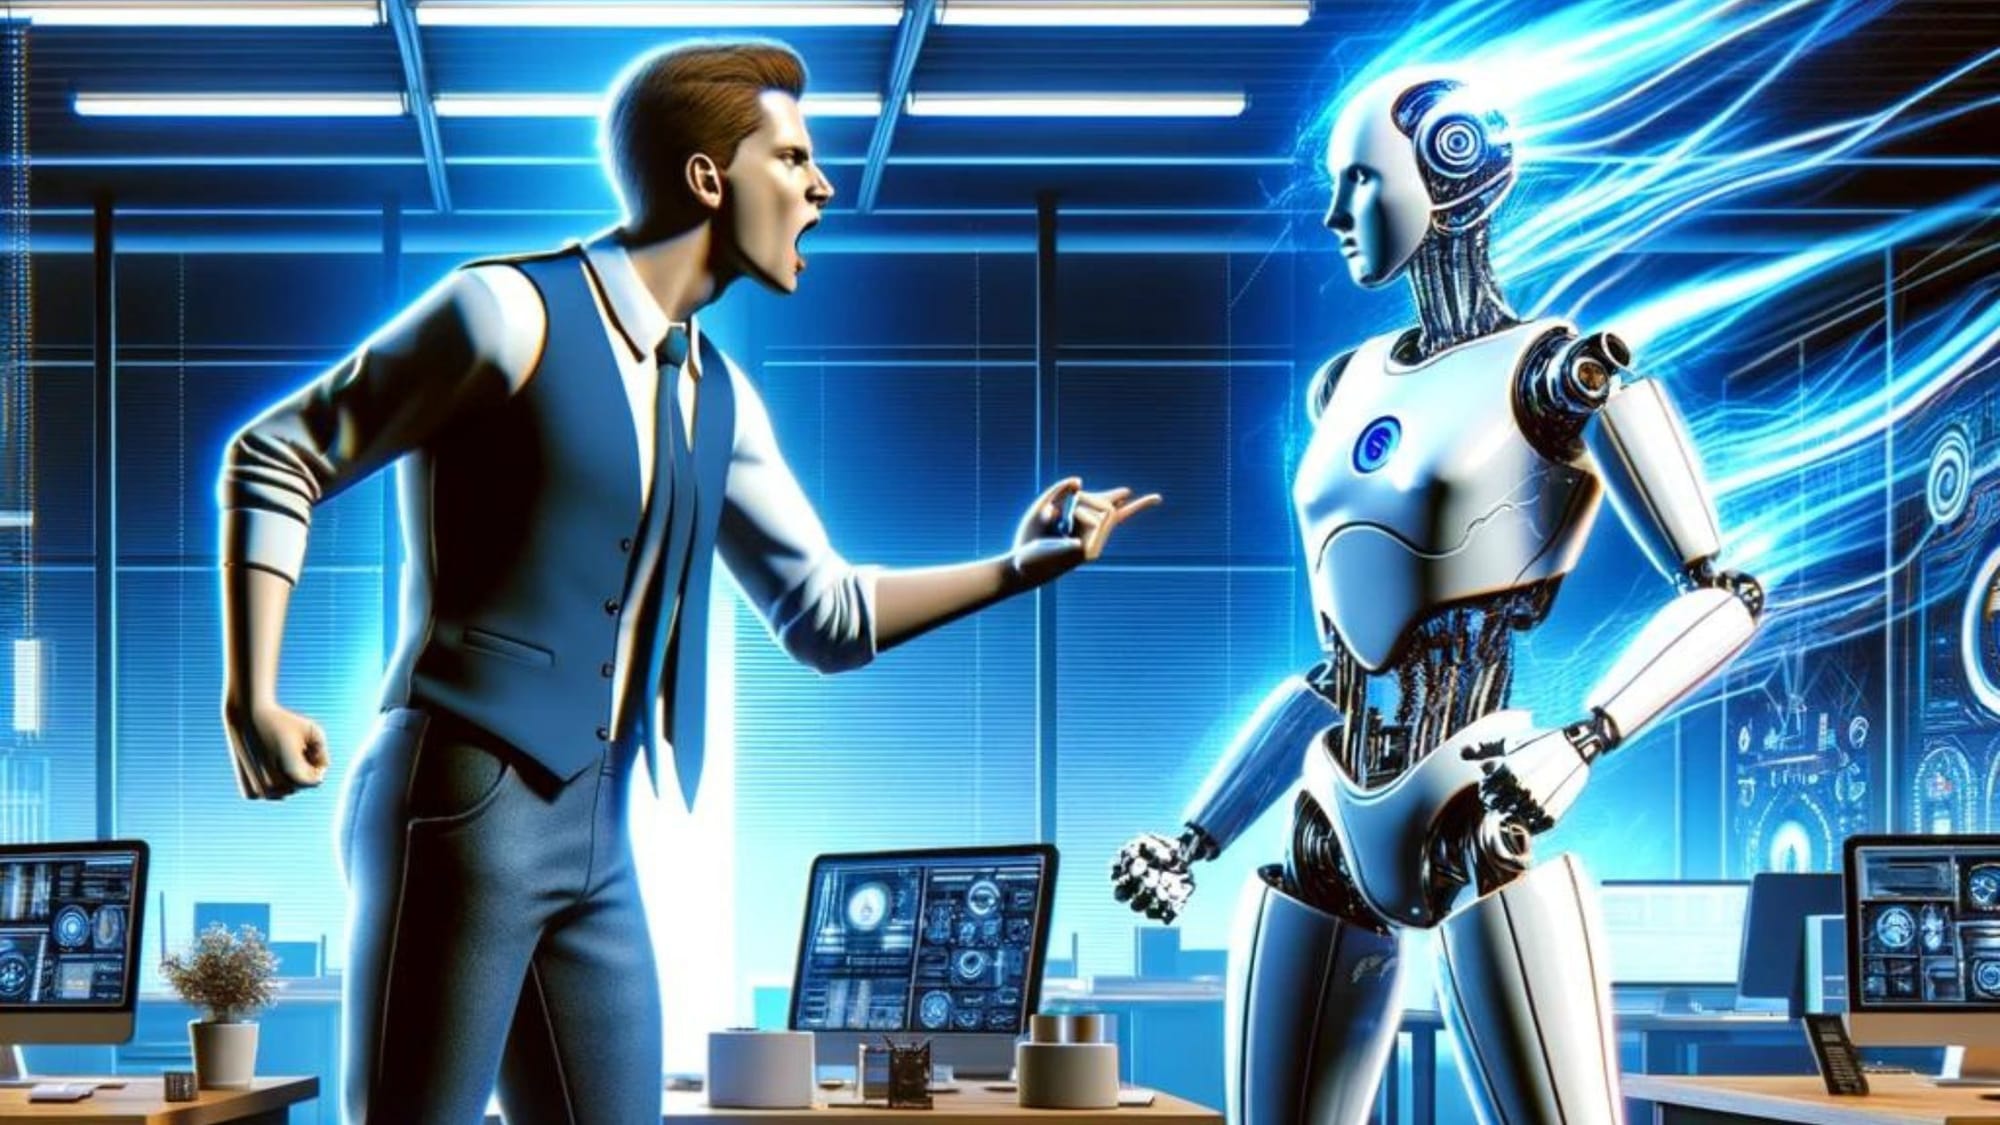 "AI vs. Humans: Understanding the Potential for Workplace Conflict"